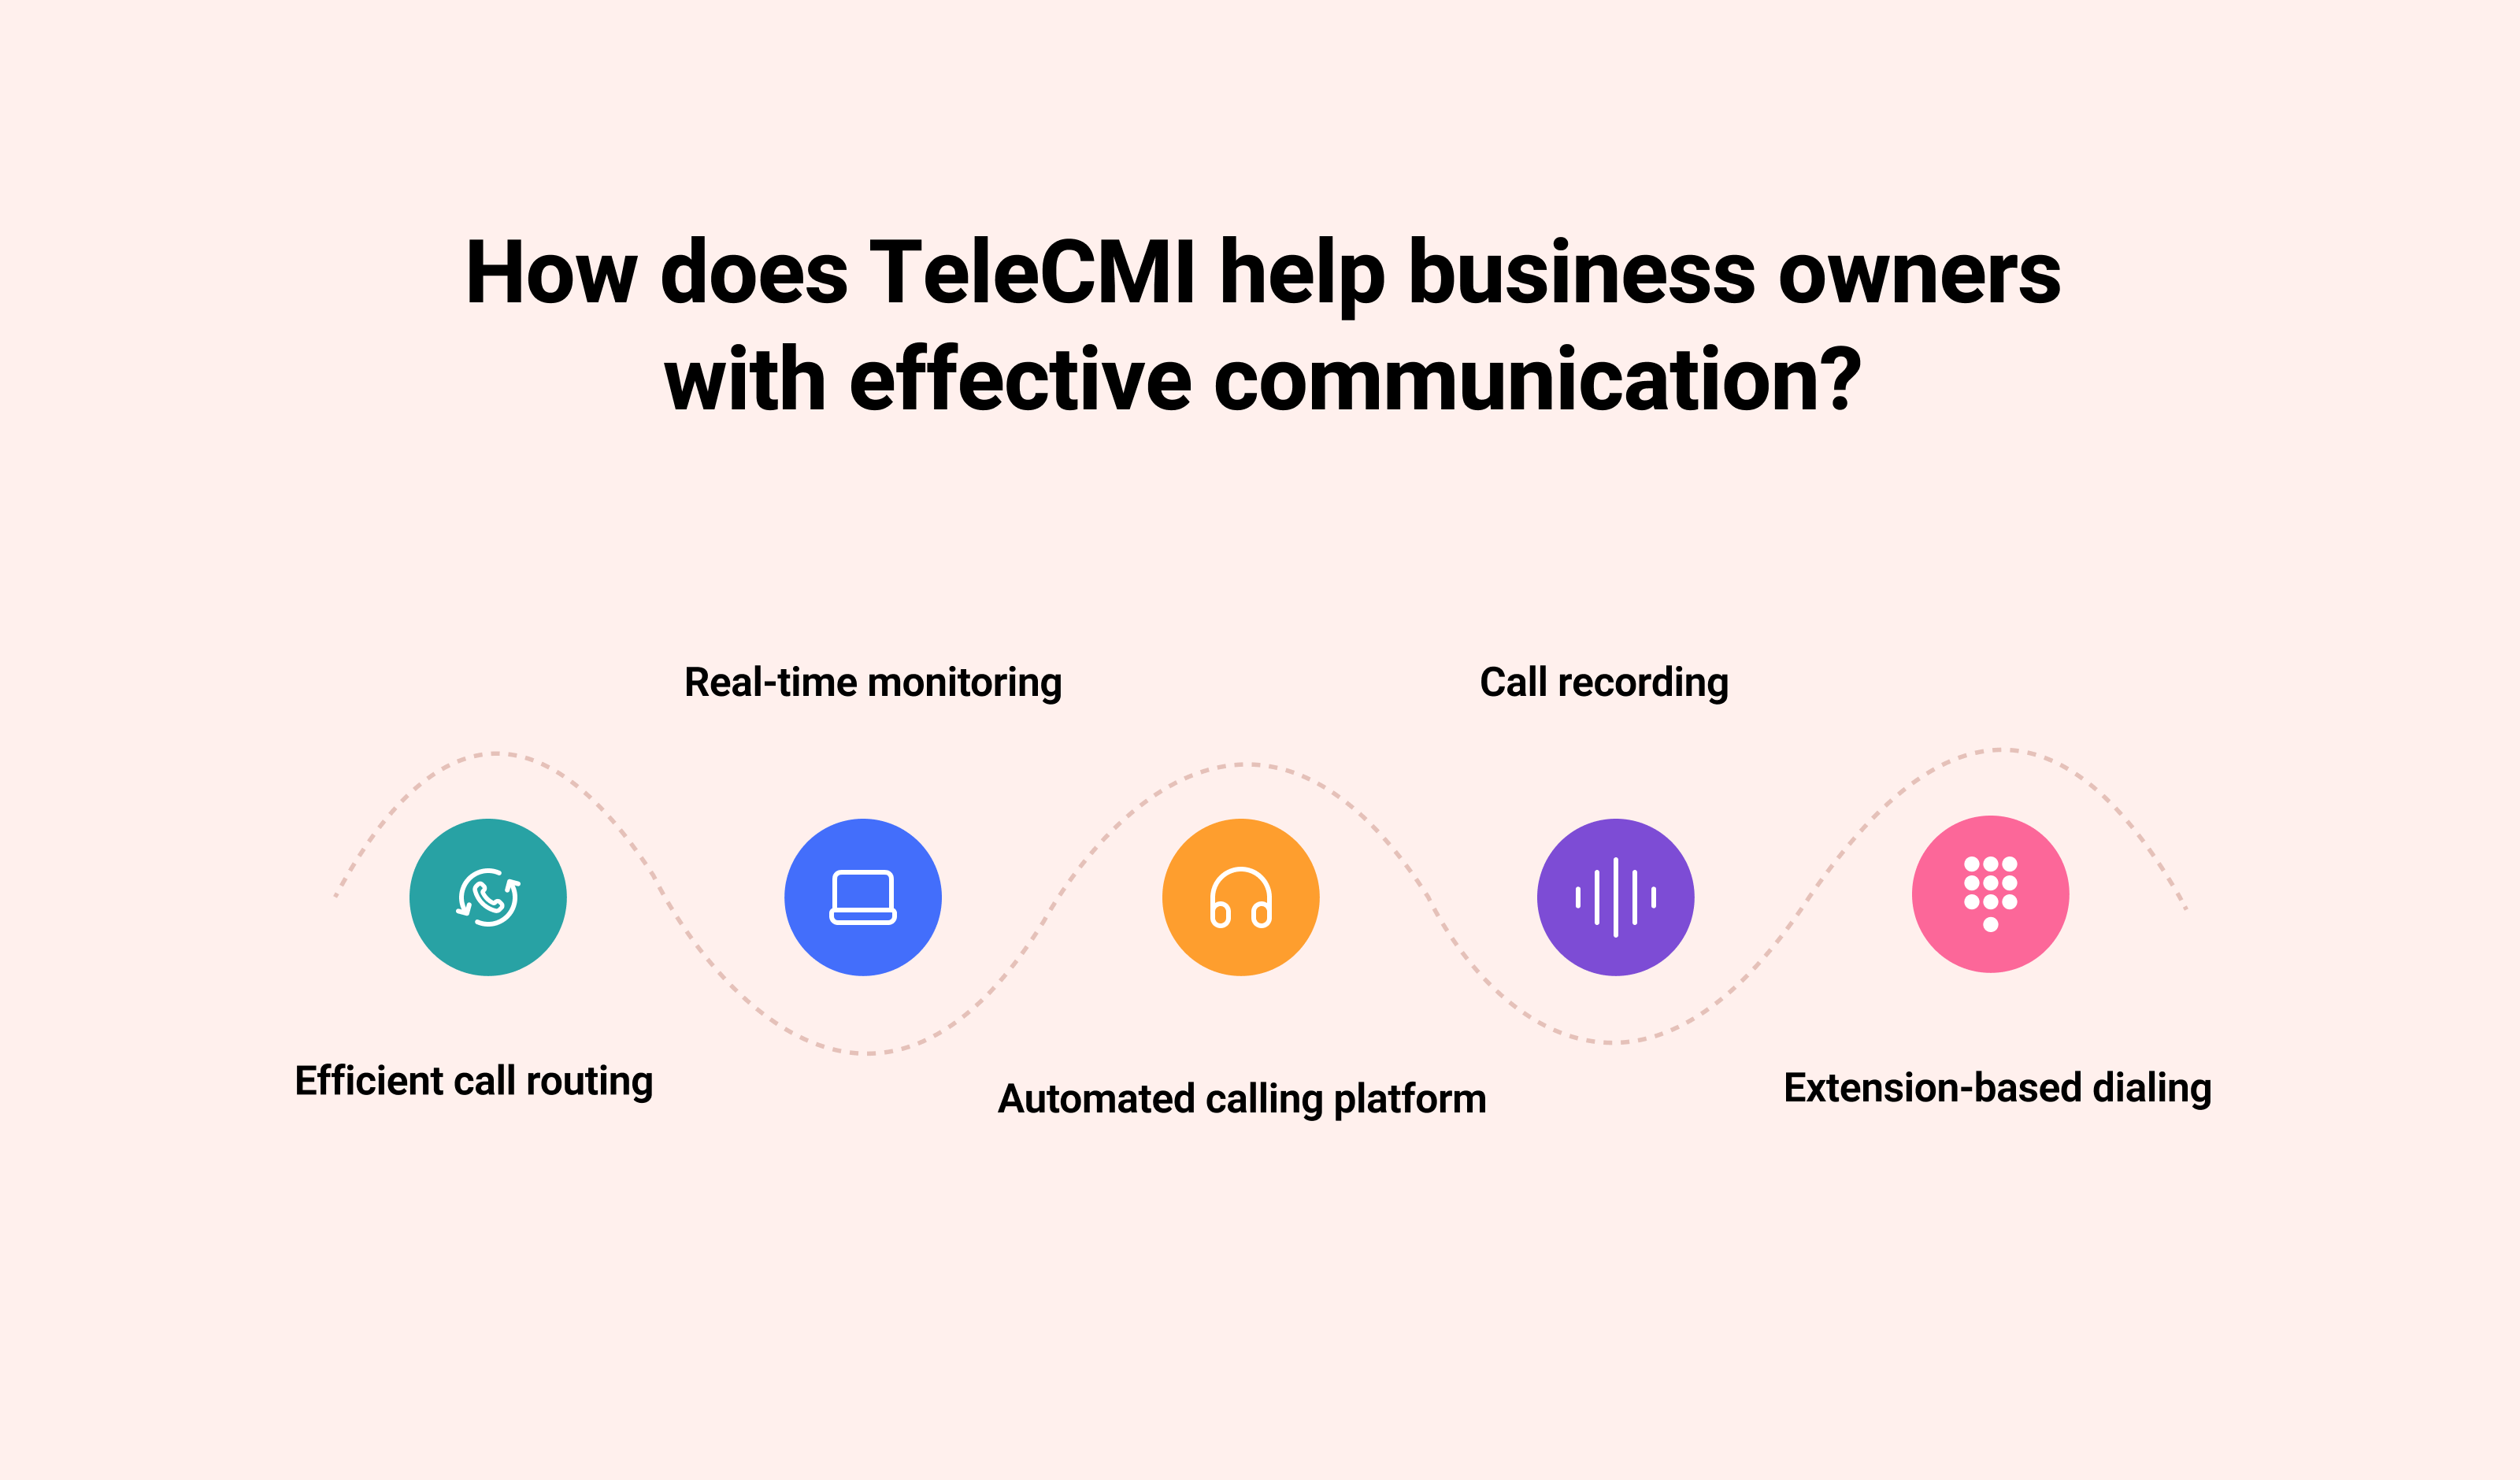 How does TeleCMI help Business Owners with Effective Communication?